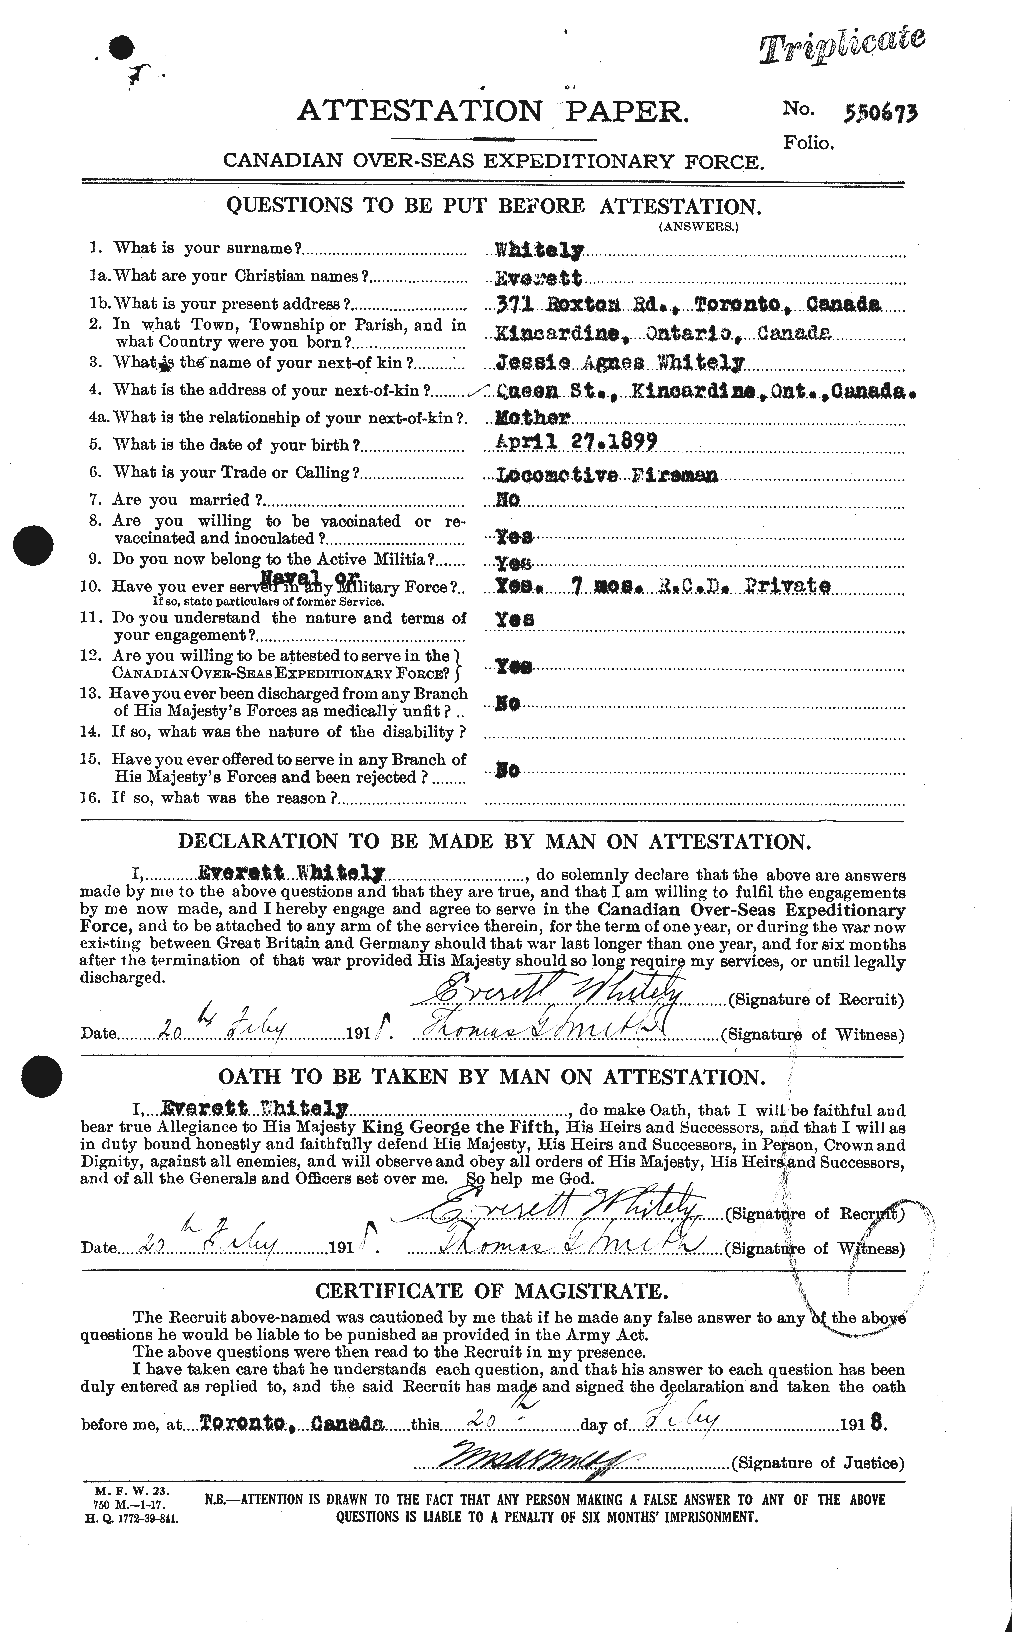 Personnel Records of the First World War - CEF 671176a